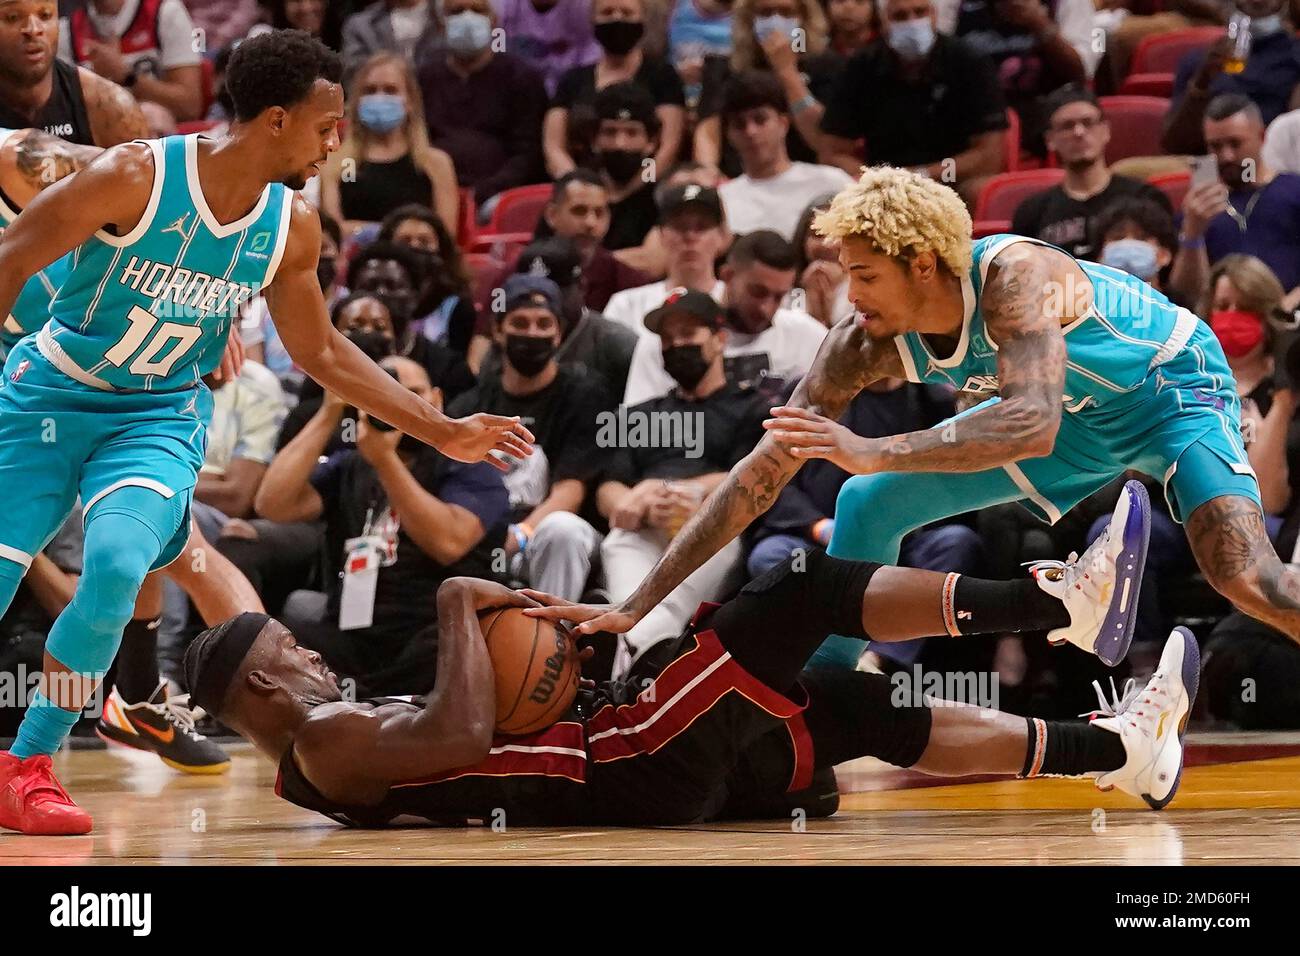 Charlotte Hornets guards Kelly Oubre Jr., left, and Isaiah Thomas, center,  vie for a rebound with New York Knicks guard Quentin Grimes, right, during  the first half of an NBA basketball game